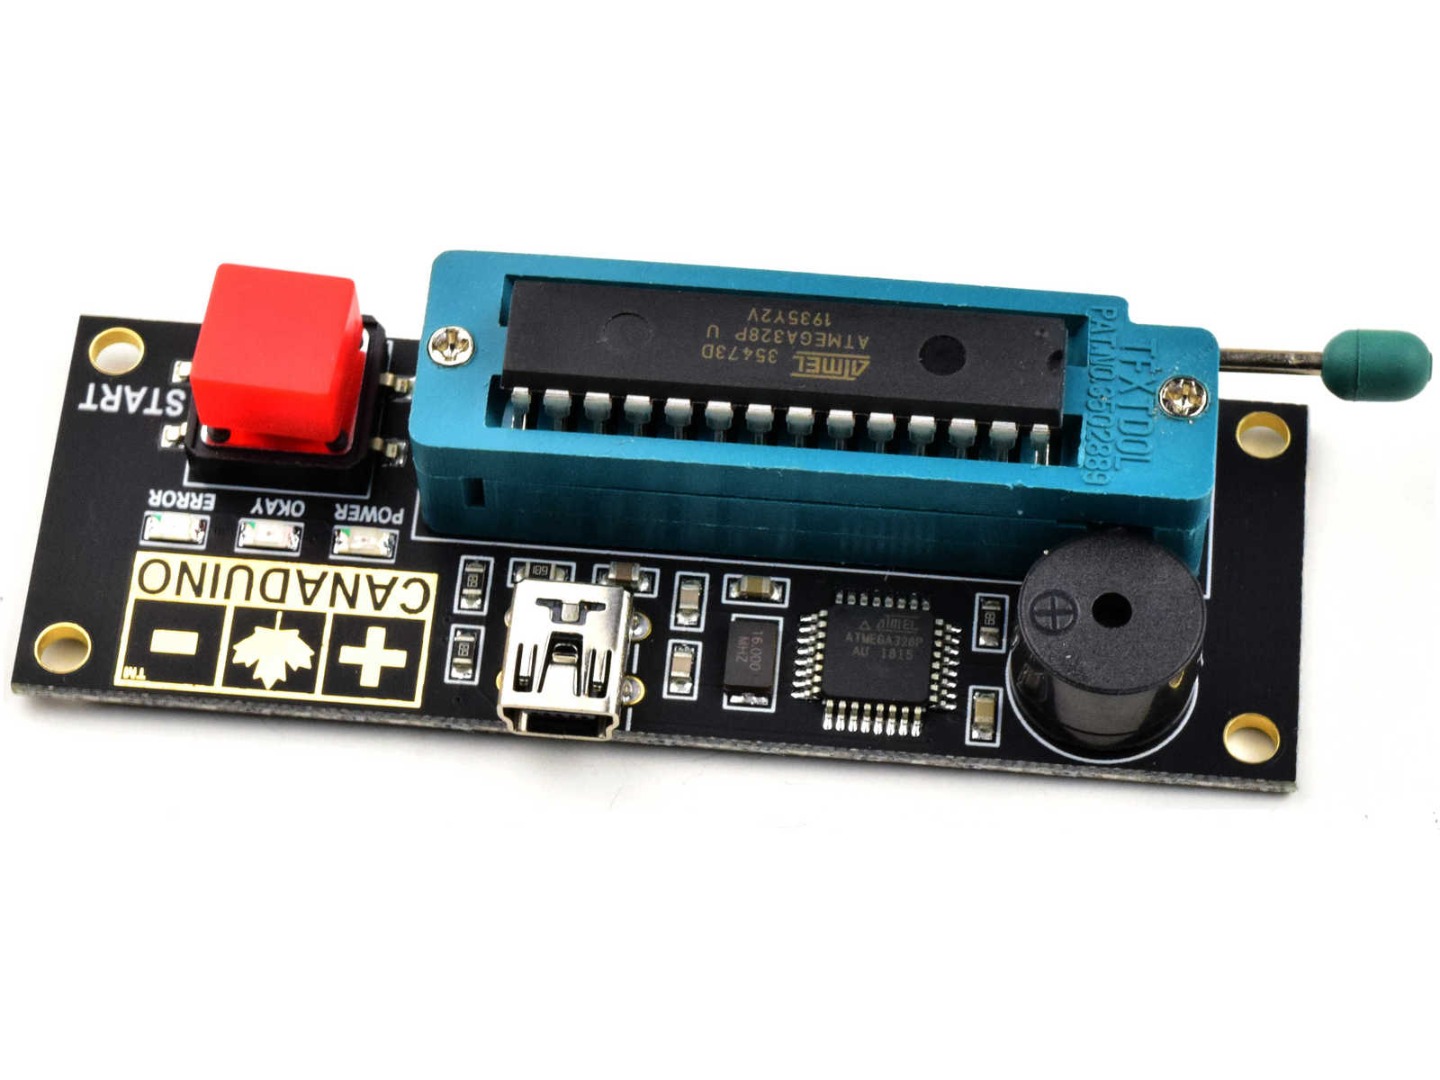 Full-Automatic Bootloader Programmer for Atmega328P MCU (100% compatible with Arduino) 4